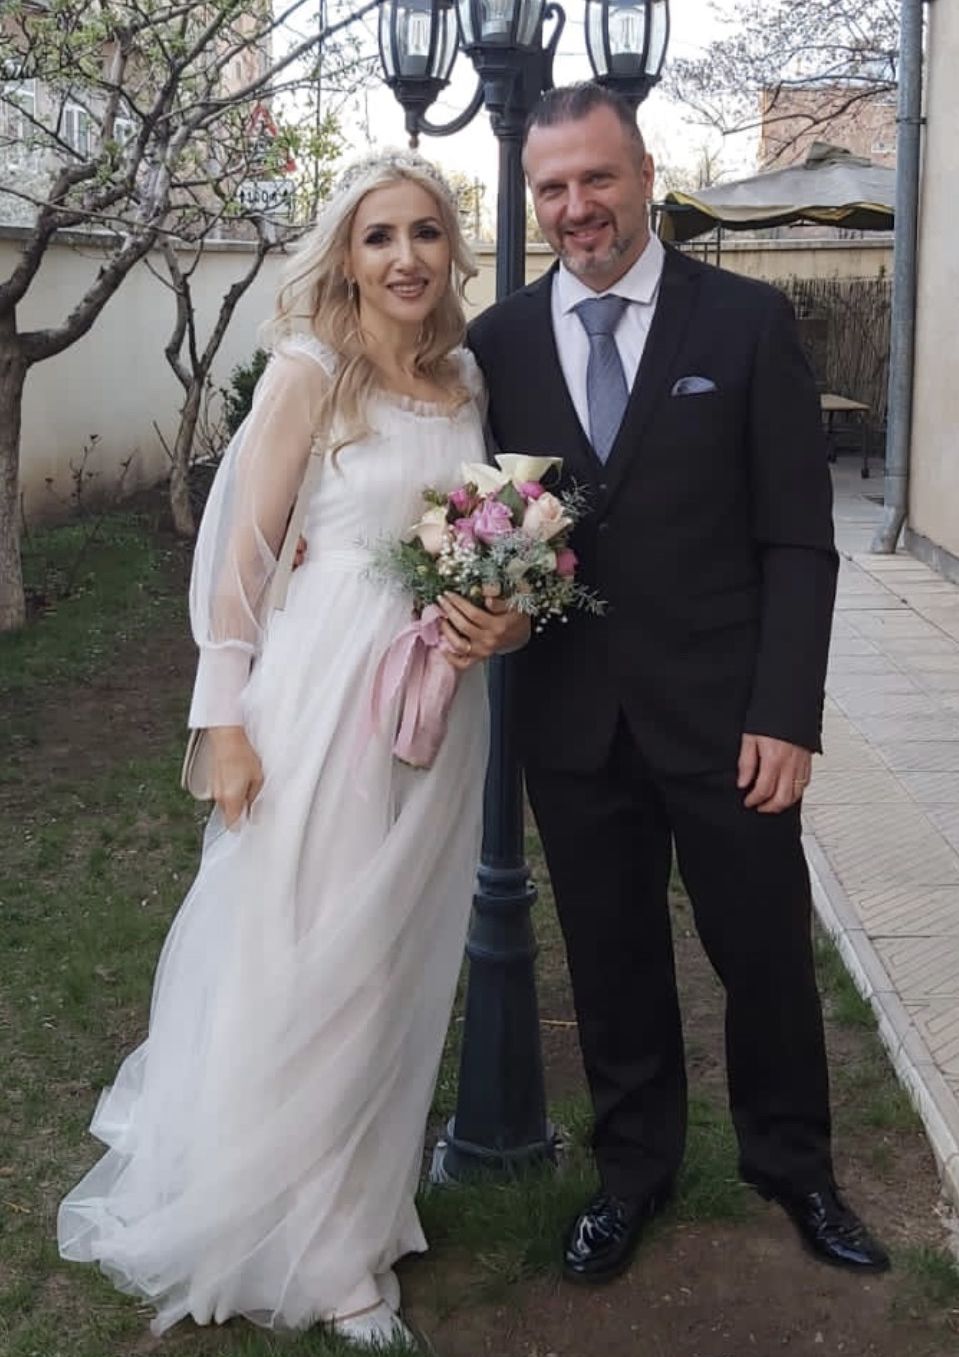 A beautiful blonde bride holds flowers as she stands next to her new Christian husband, as they celebrate outdoors